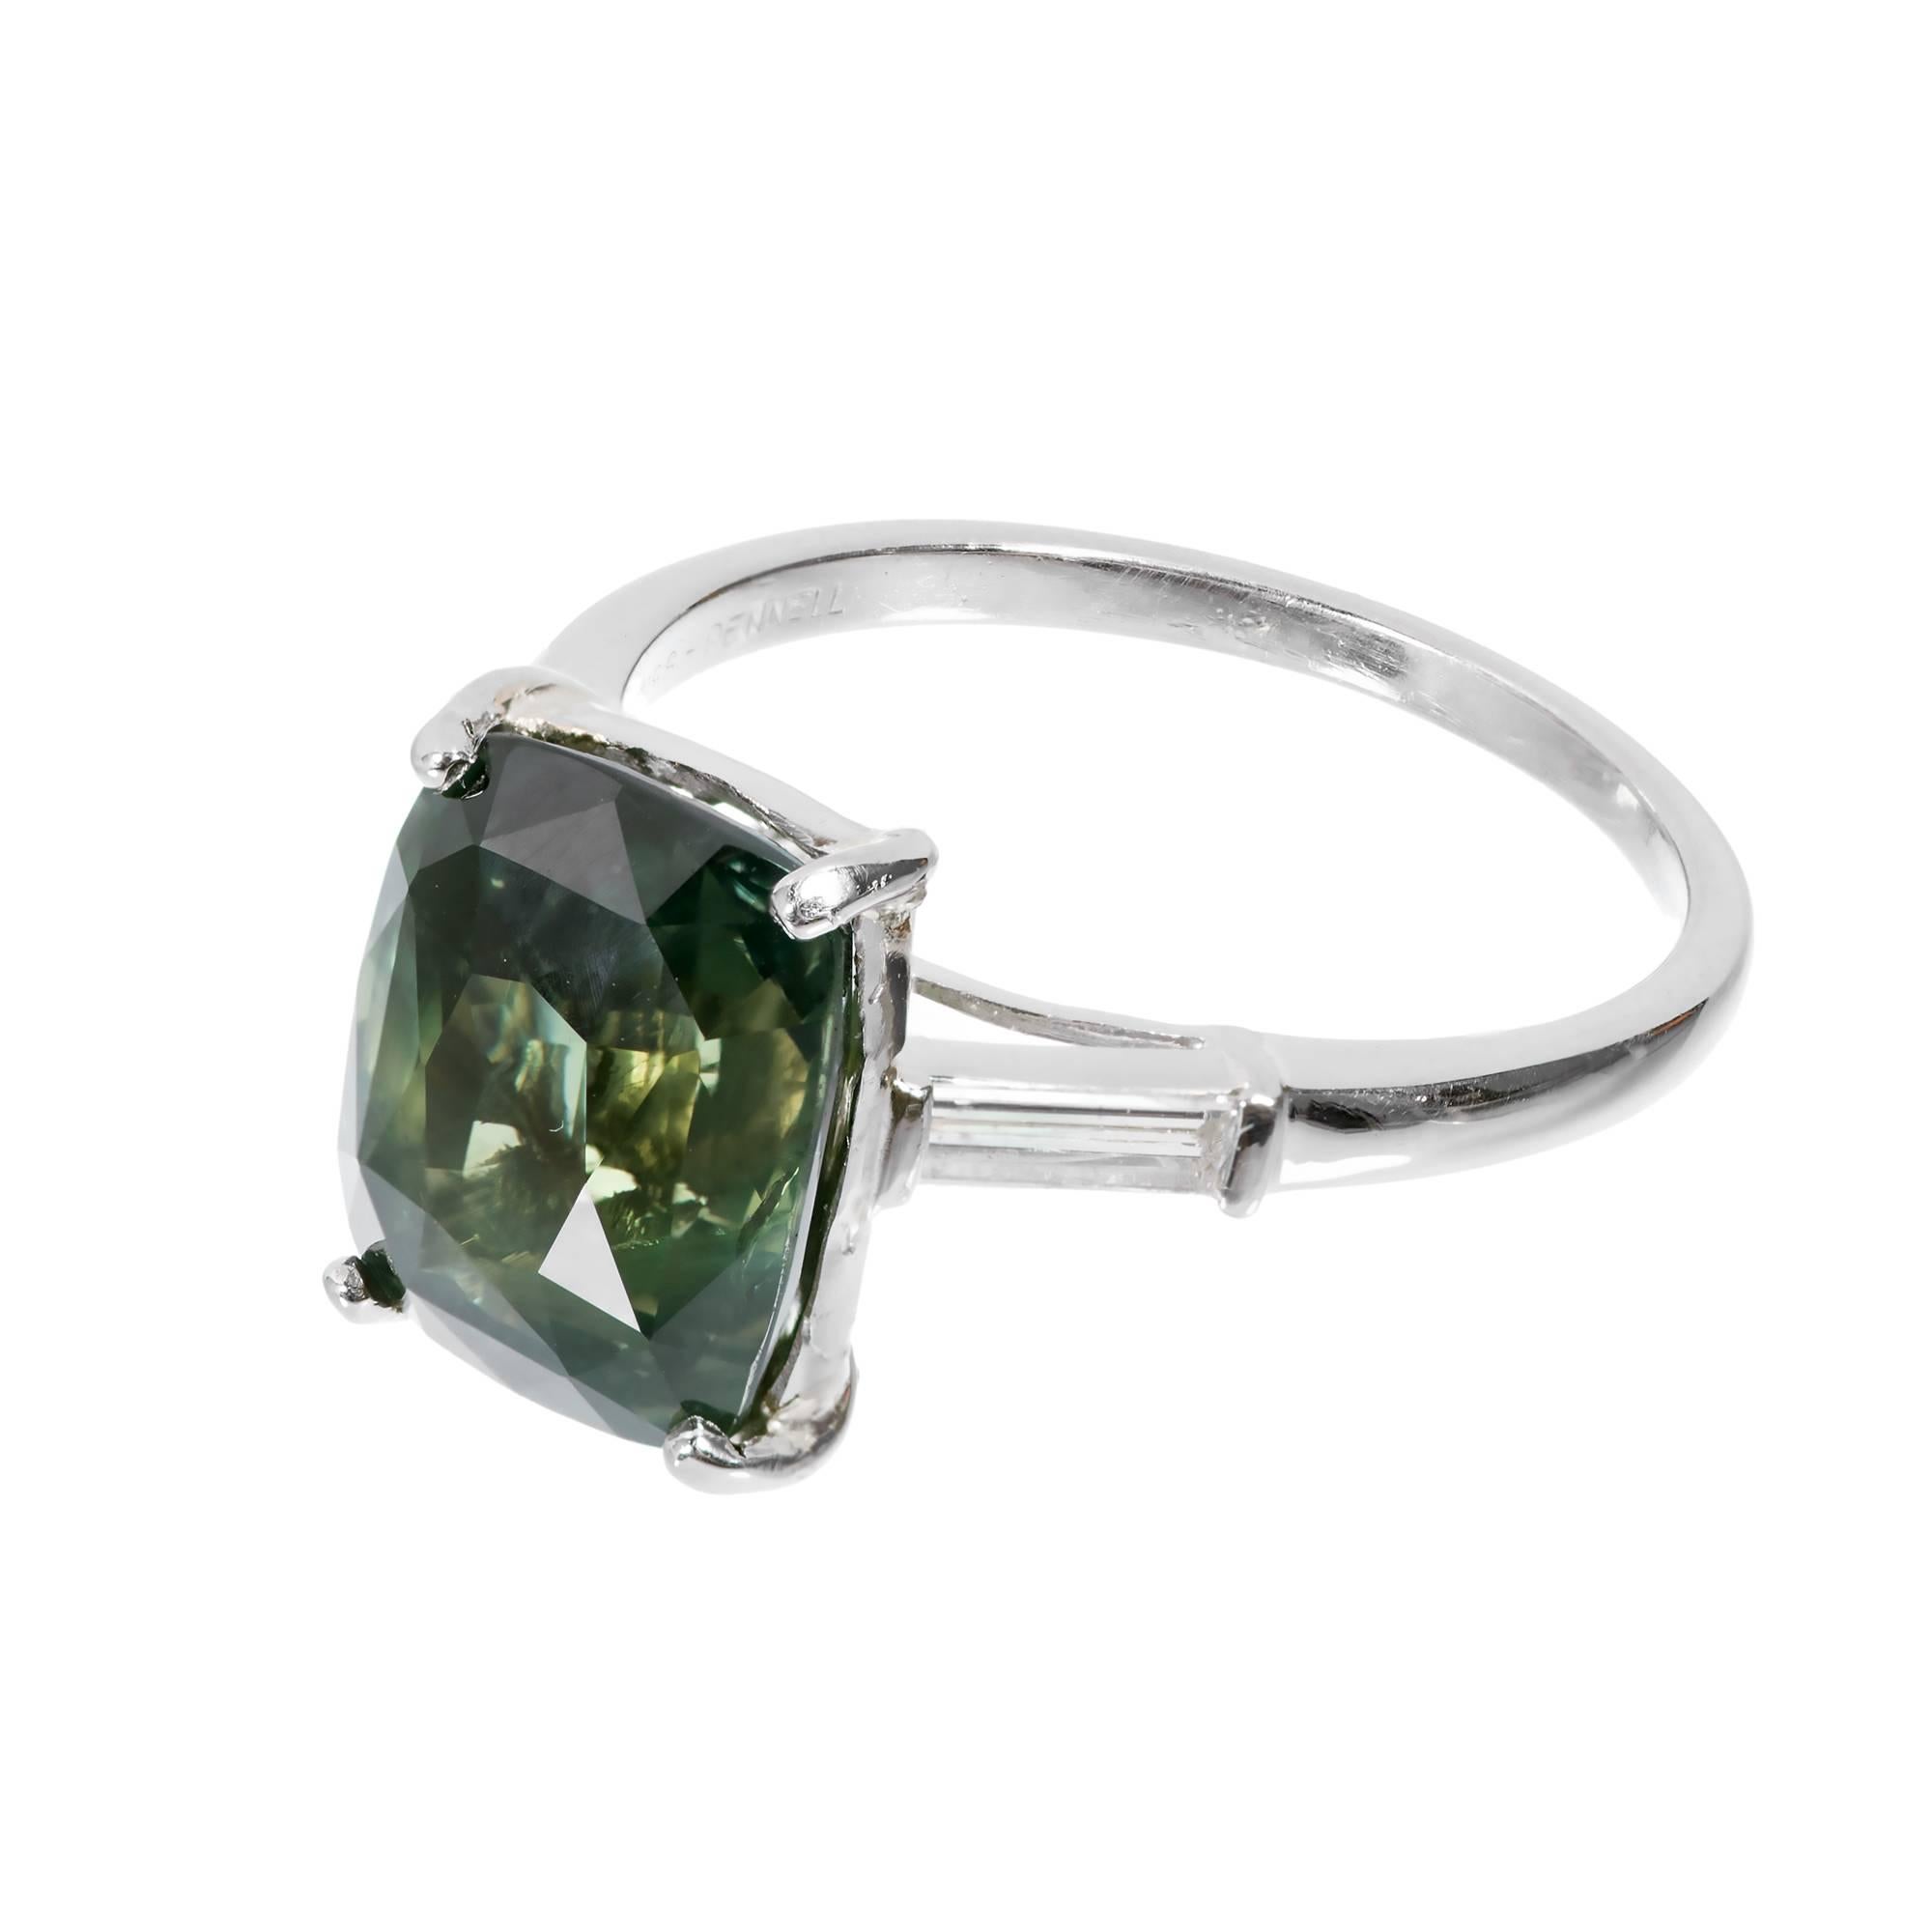 Ross Pennell Art Deco platinum cushion green sapphire diamond three-stone platinum engagement ring. 

1 Cushion Green SI Sapphire natural corundum approximately 5.98 carats. GIA 2483072141
2 tapered baguette diamonds G VS approximately .28